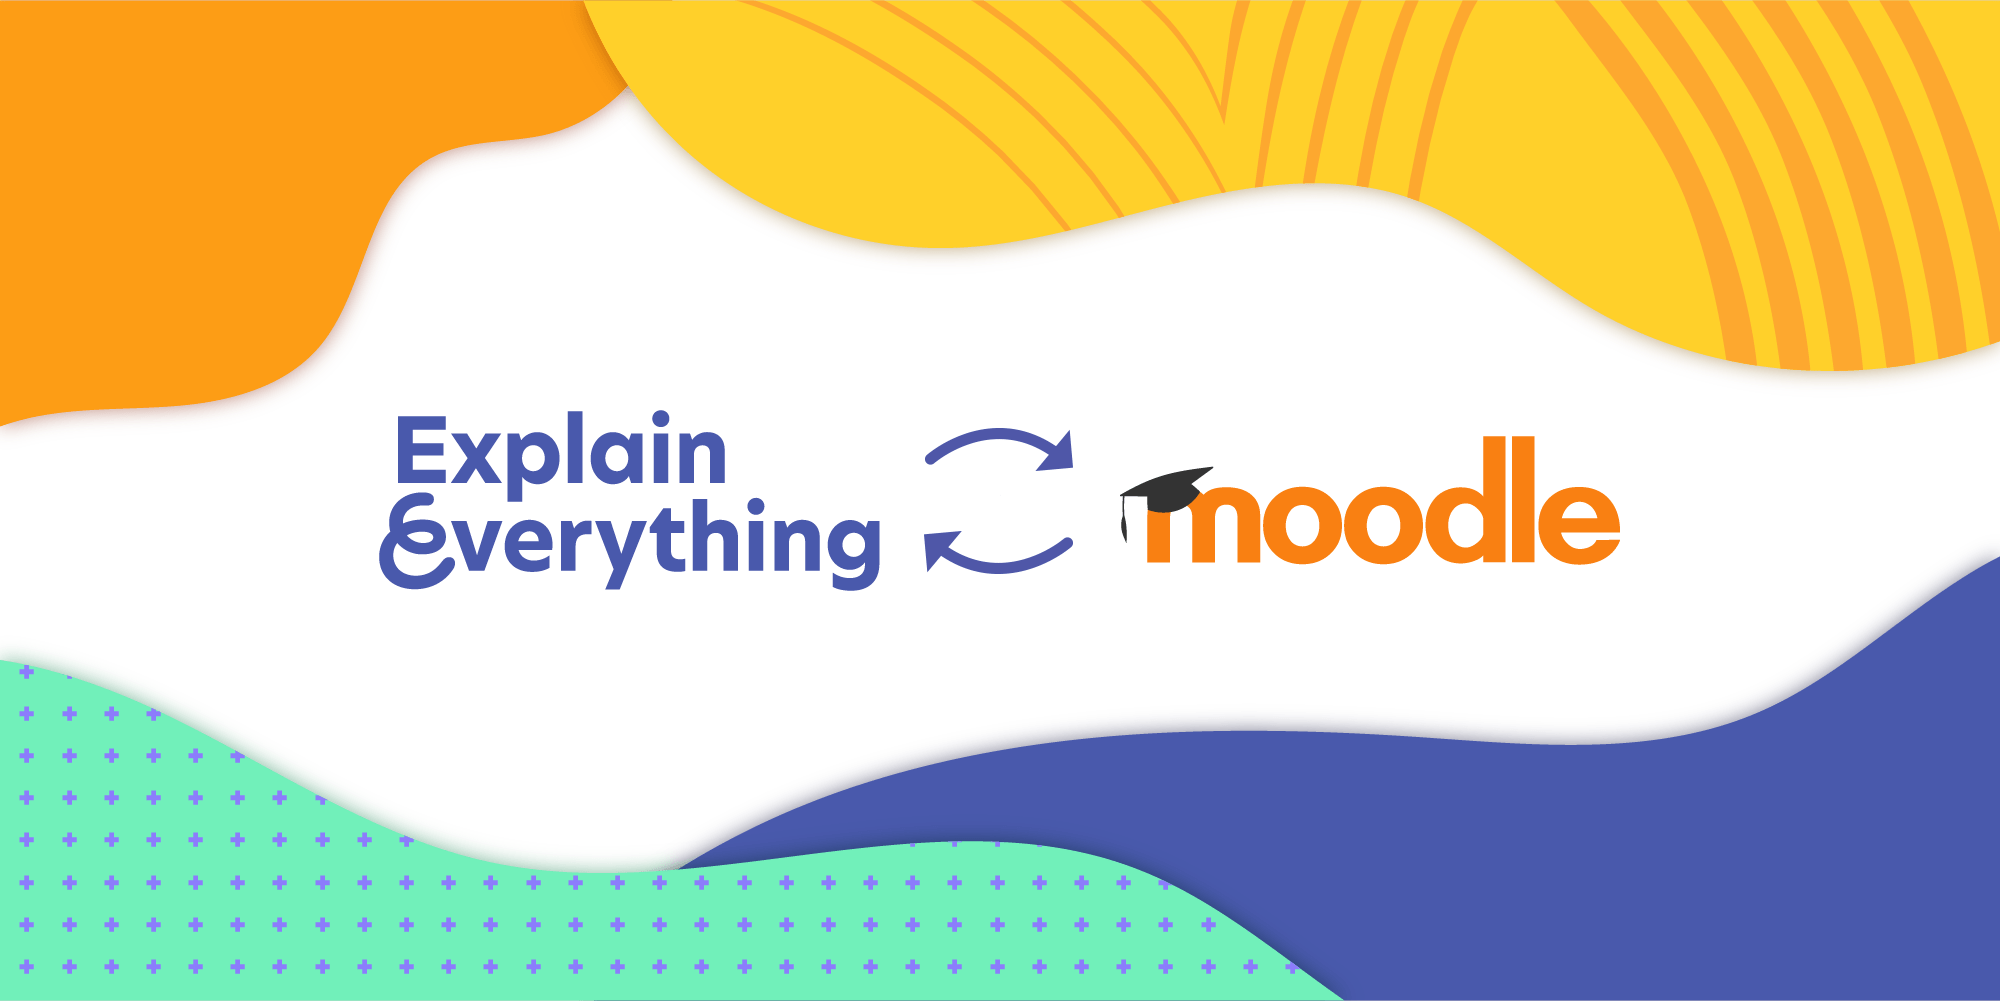 Moodle and Explain Everything